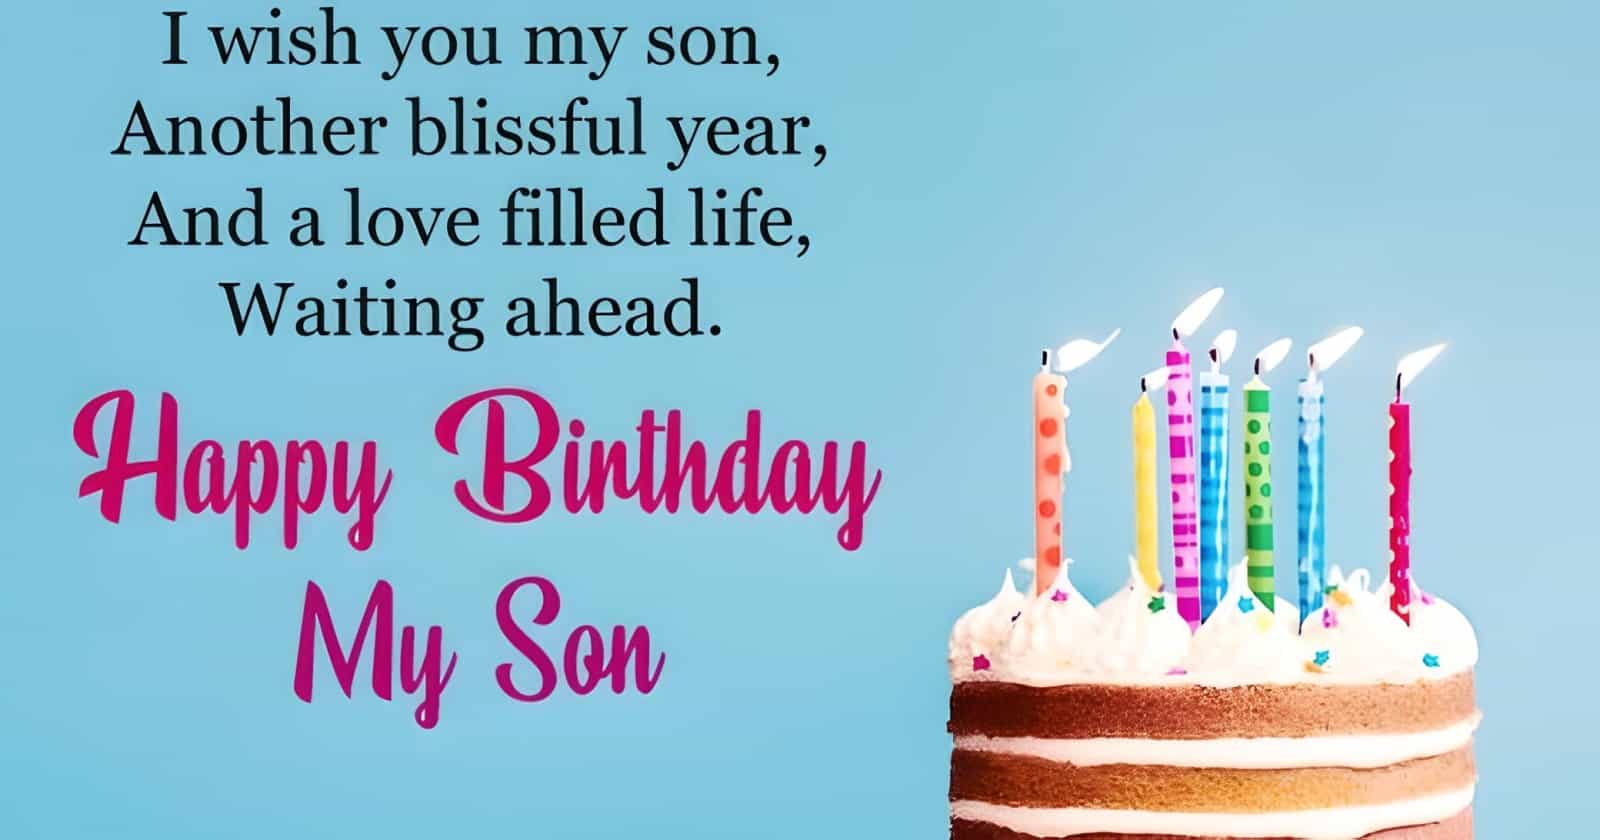 Happy Birthday Messages and Wishes for Sons